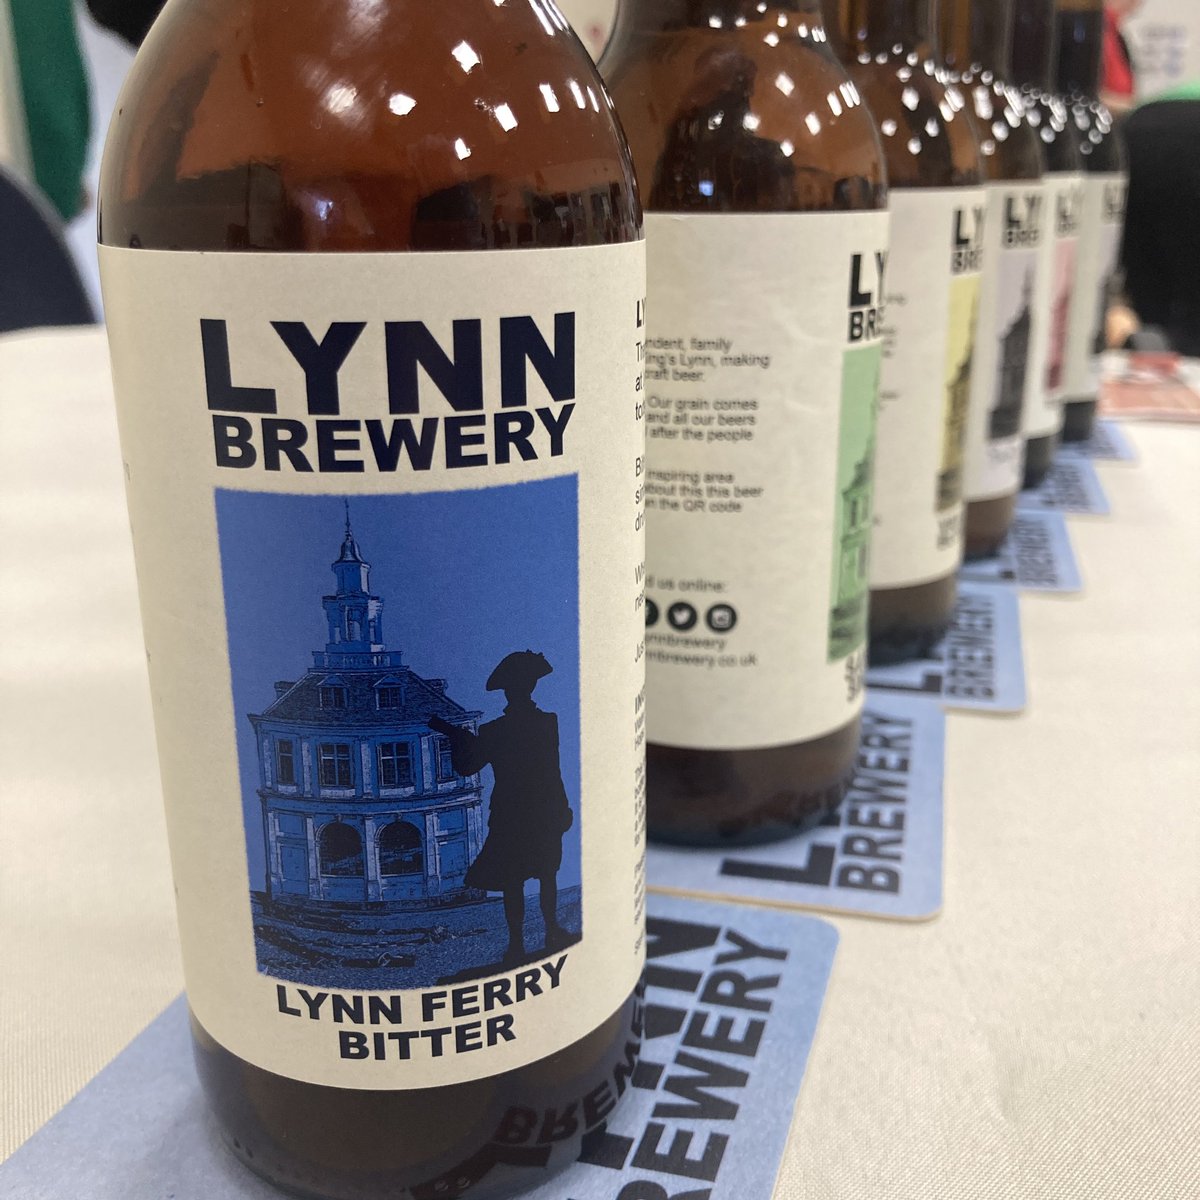 Open now at North Wootton Village Hall! Lynn Ferry Bitter is back in stock, together with several other beers, both pale and dark. Hope to see you soon!